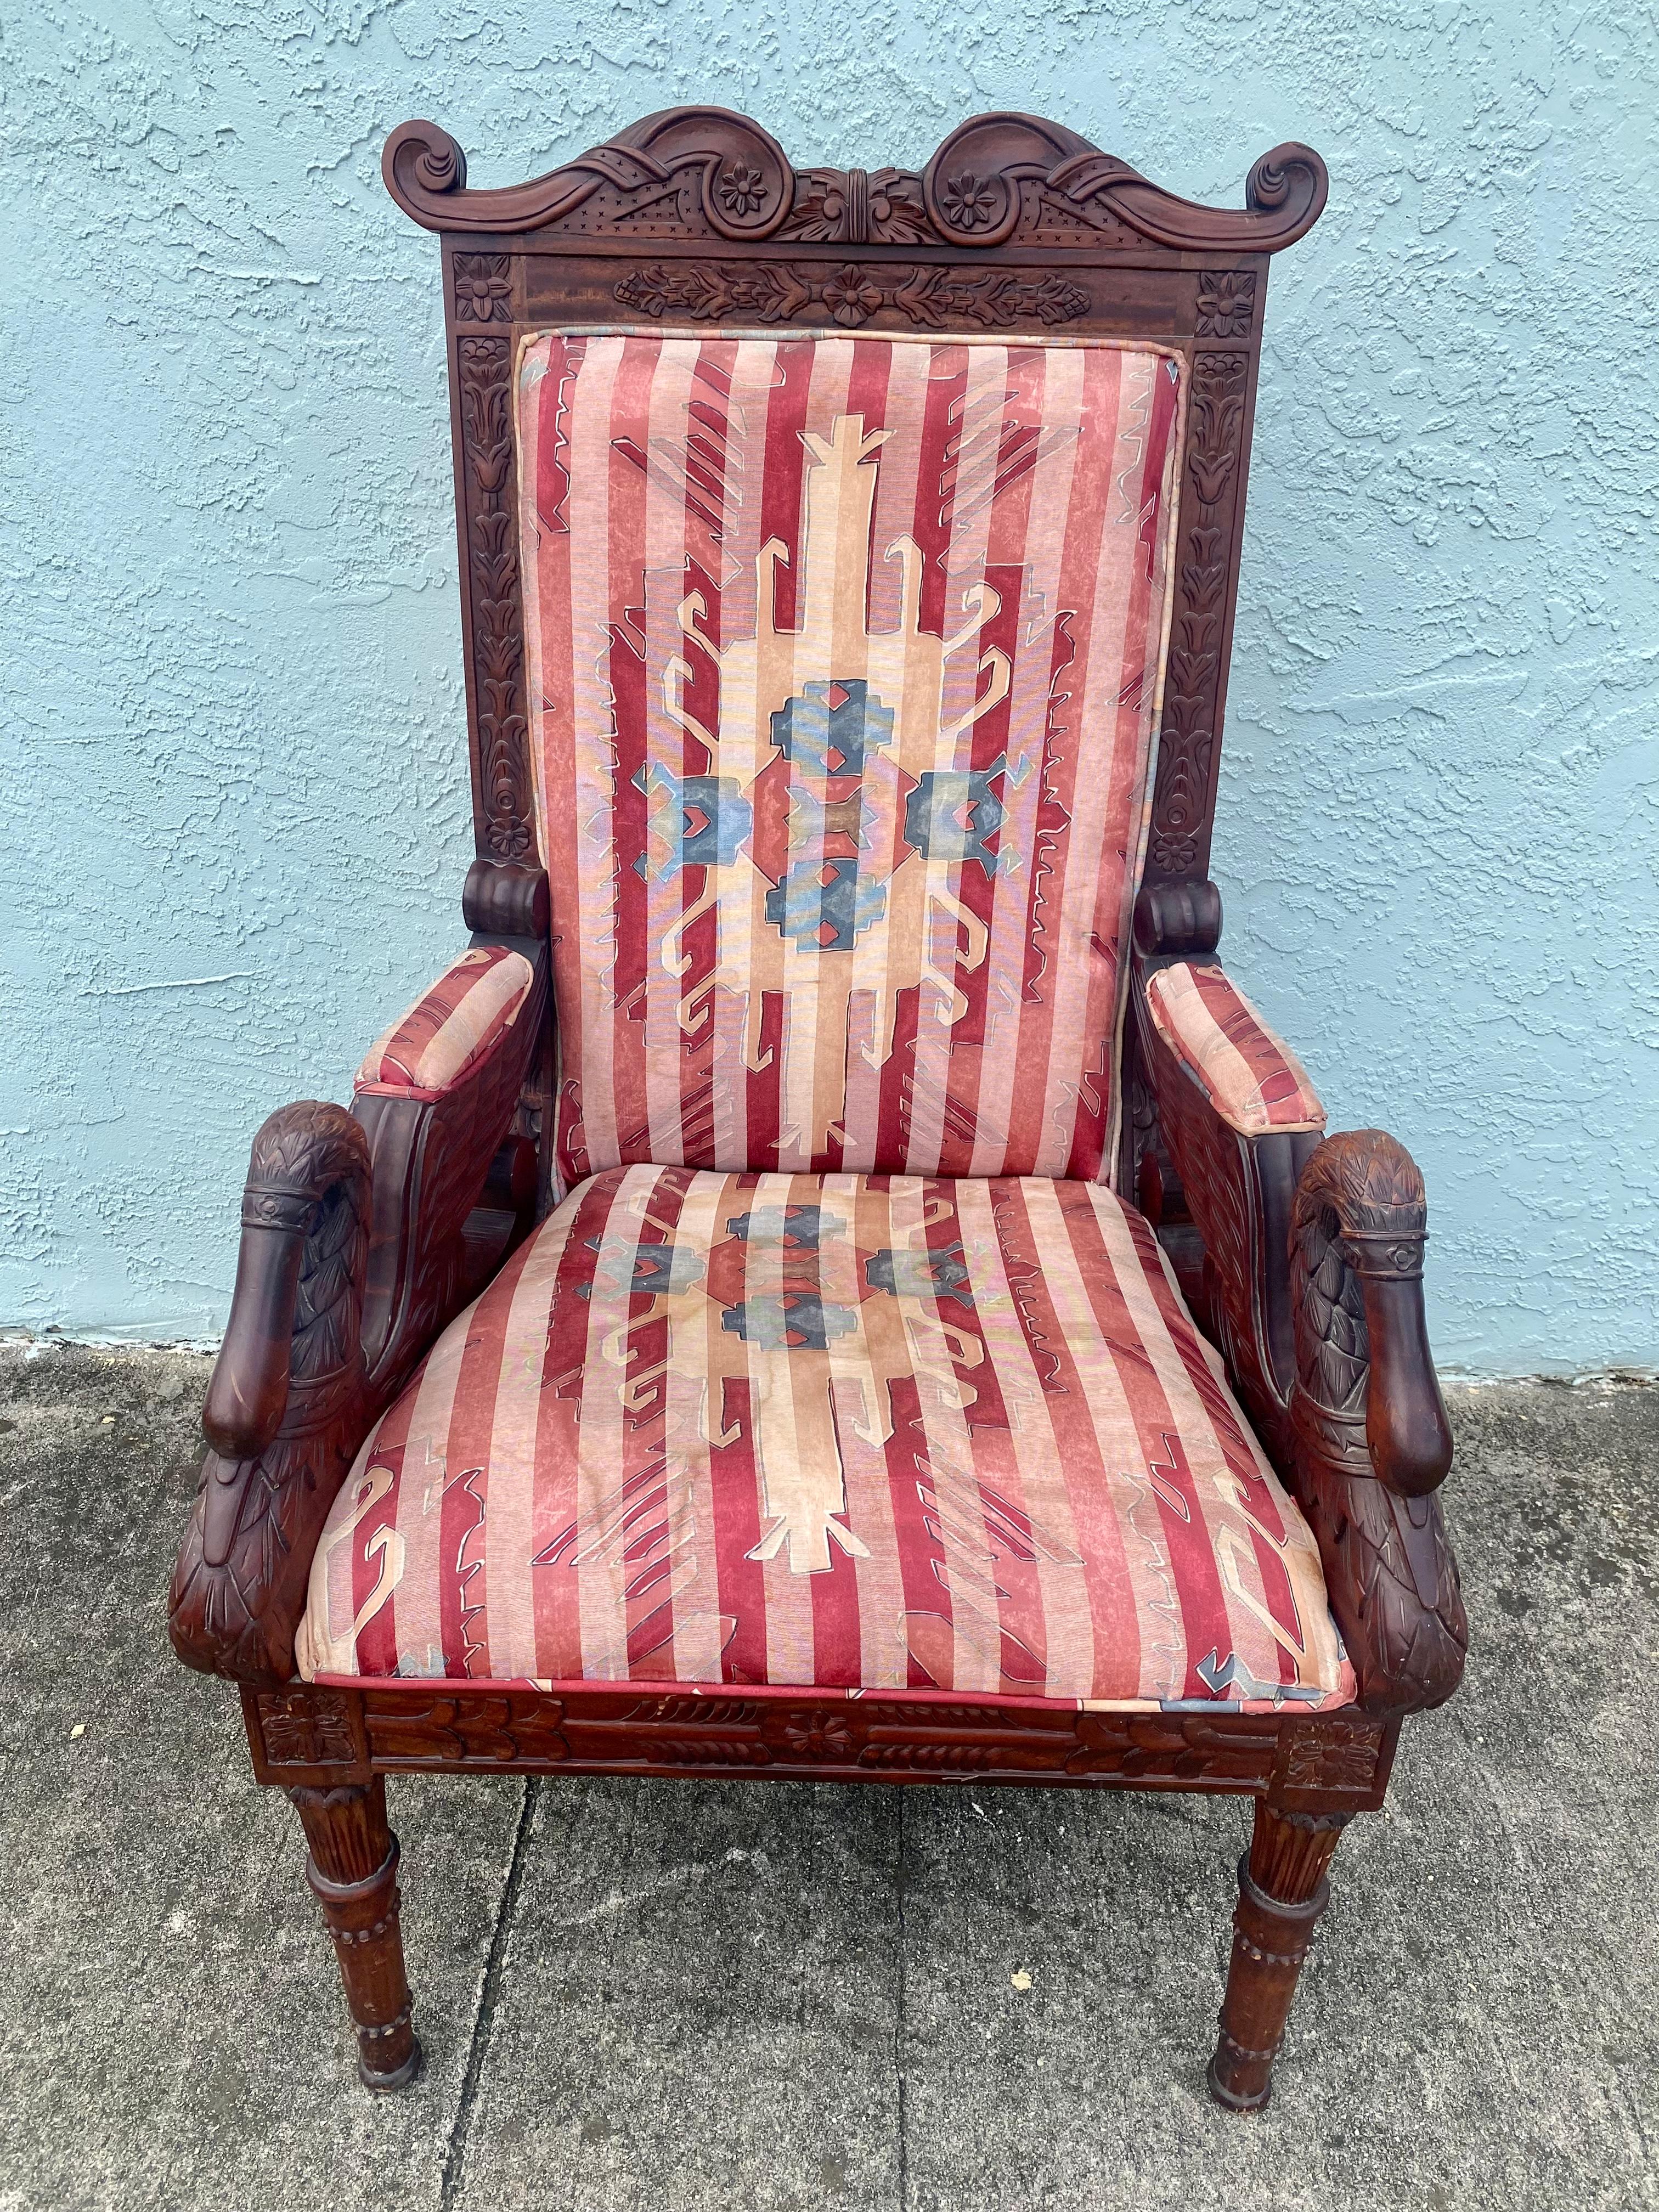 On offer on this occasion is one of the most stunning, chairs you could hope to find. This is an ultra-rare opportunity to acquire what is, unequivocally, the best of the best, it being a most spectacular and beautifully-presented chairs.